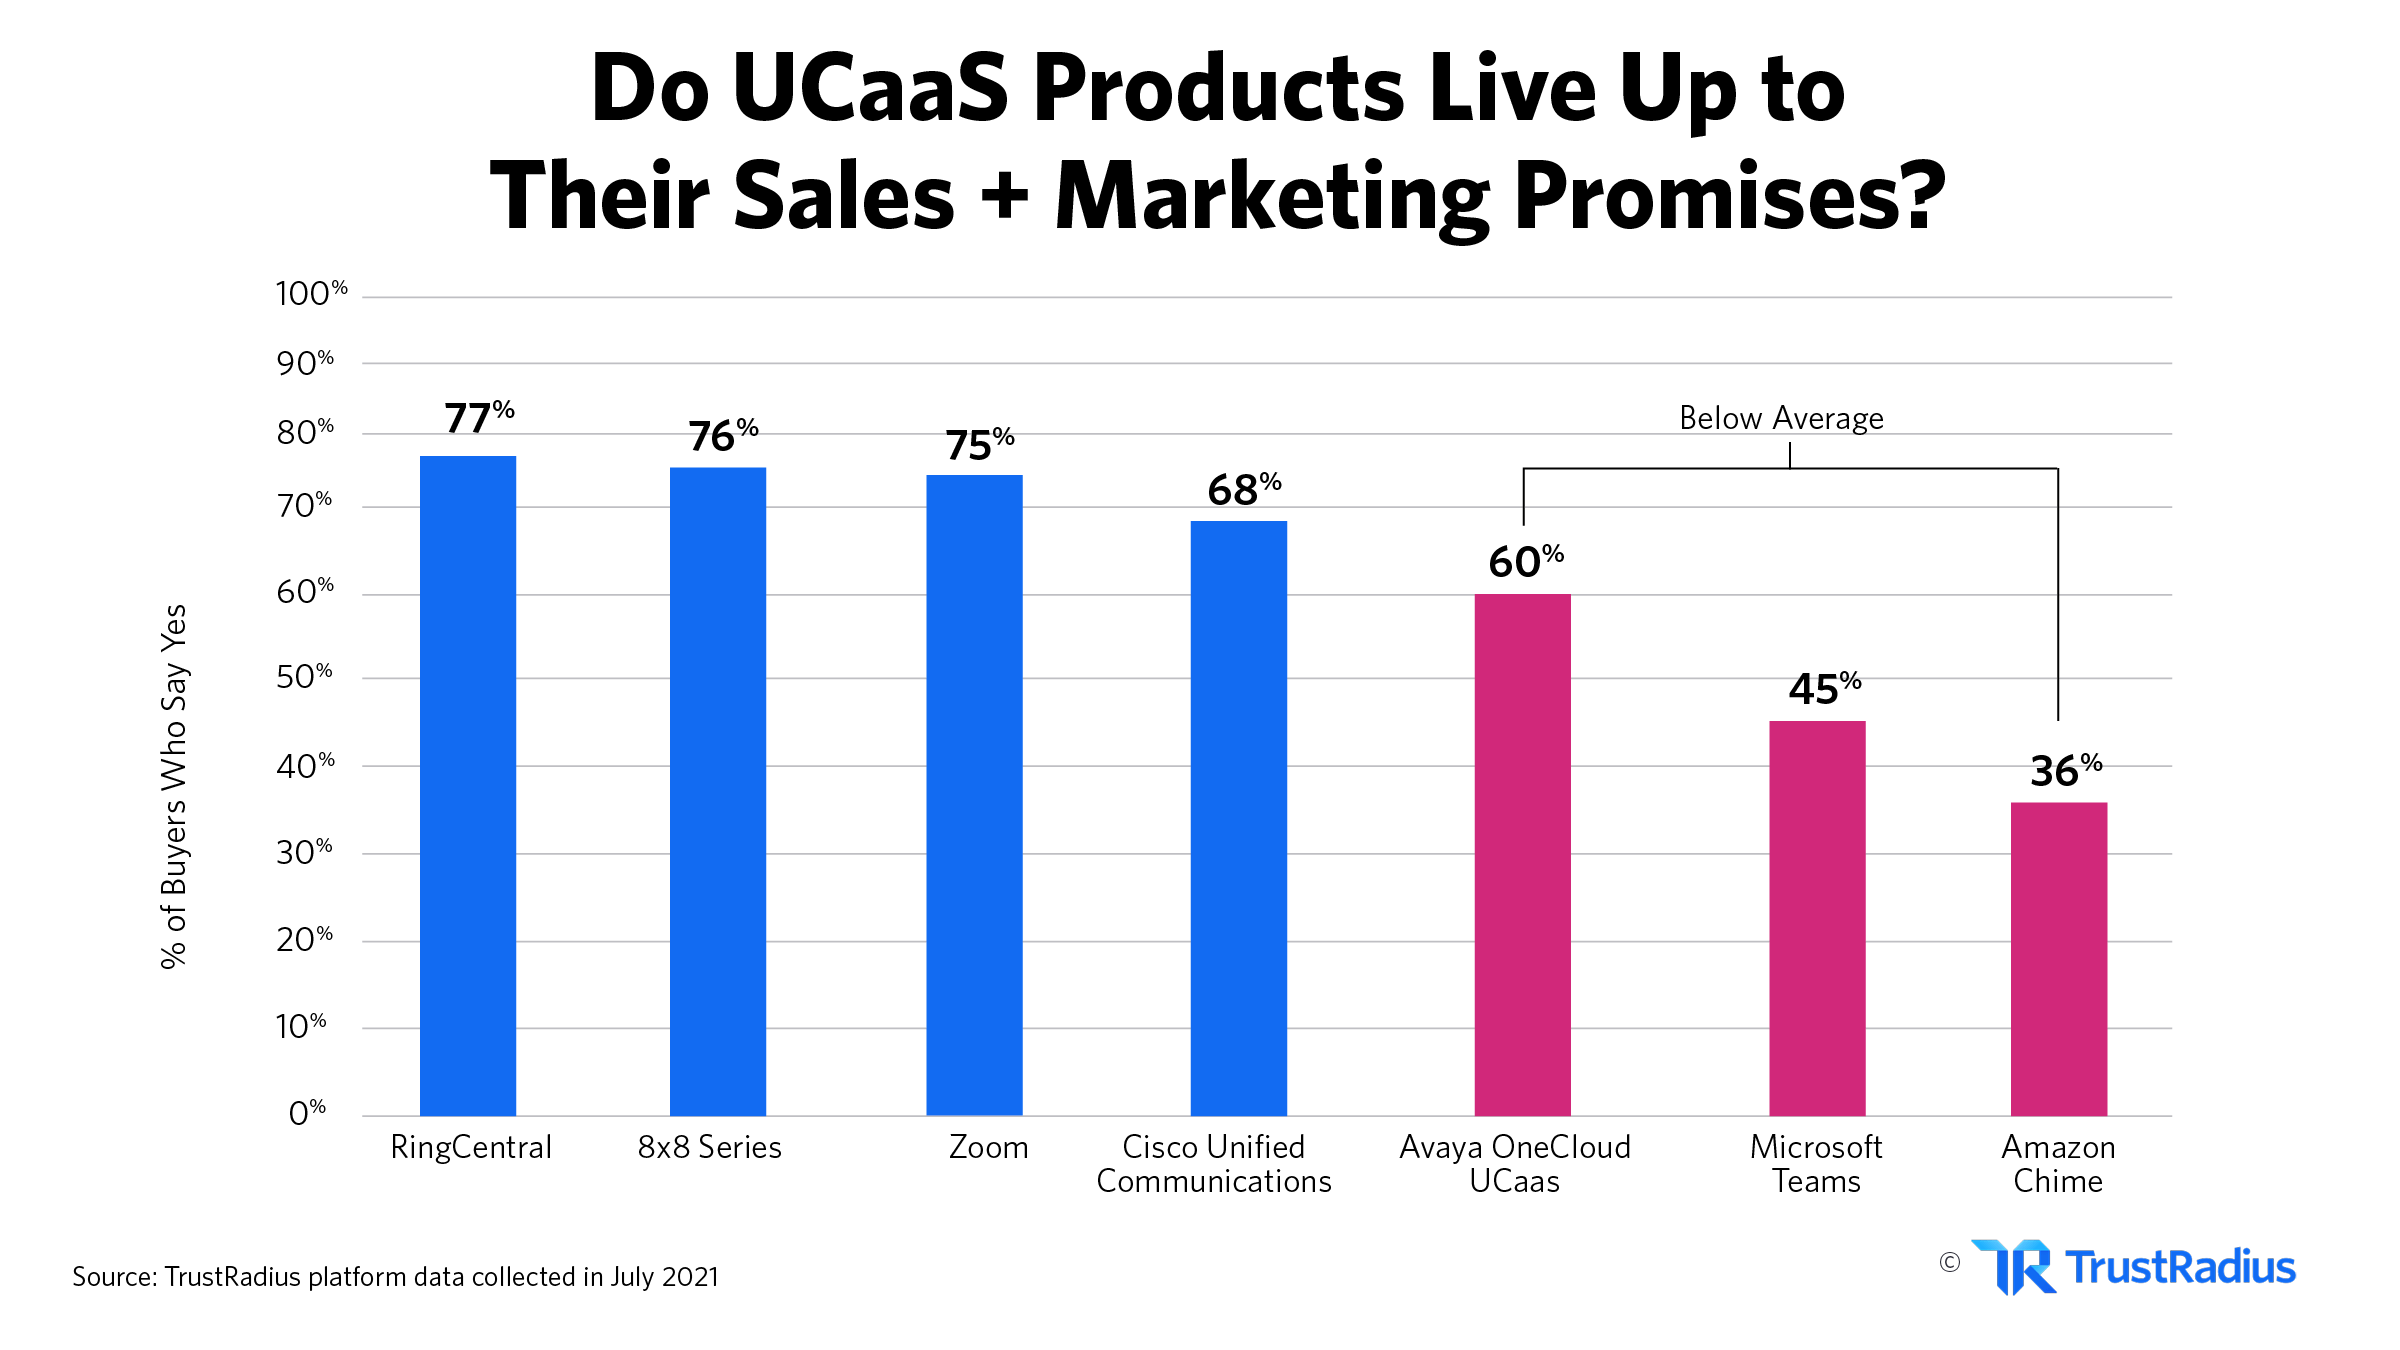 Do UCaaS products live up to sales and marketing promises